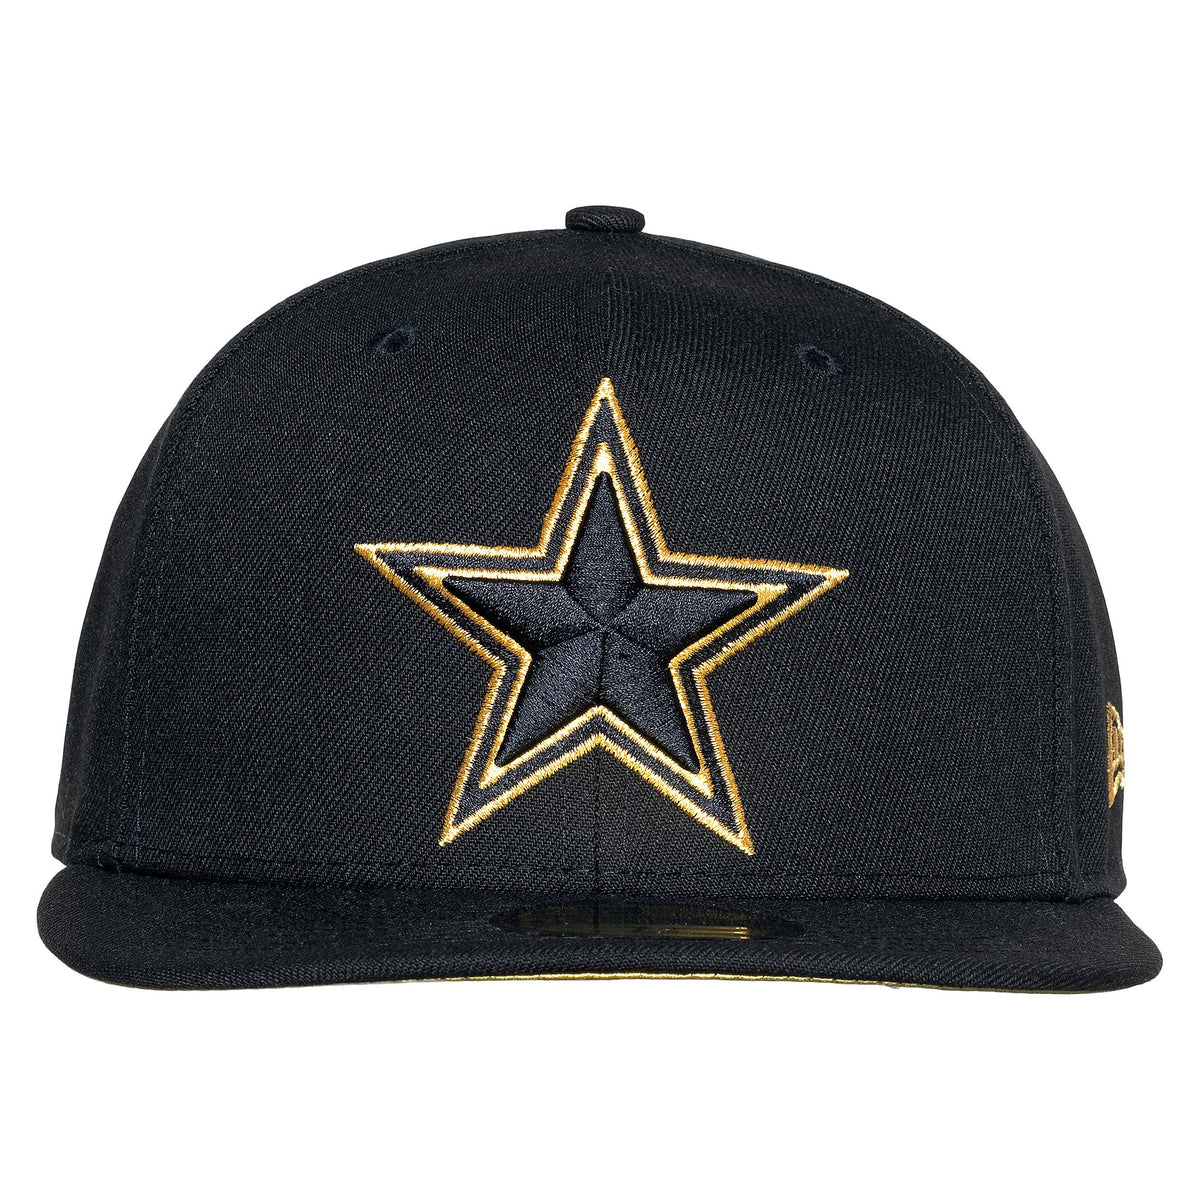 Dallas Cowboys Gold Metallic Star on Black New Era 59Fifty Fitted Cap